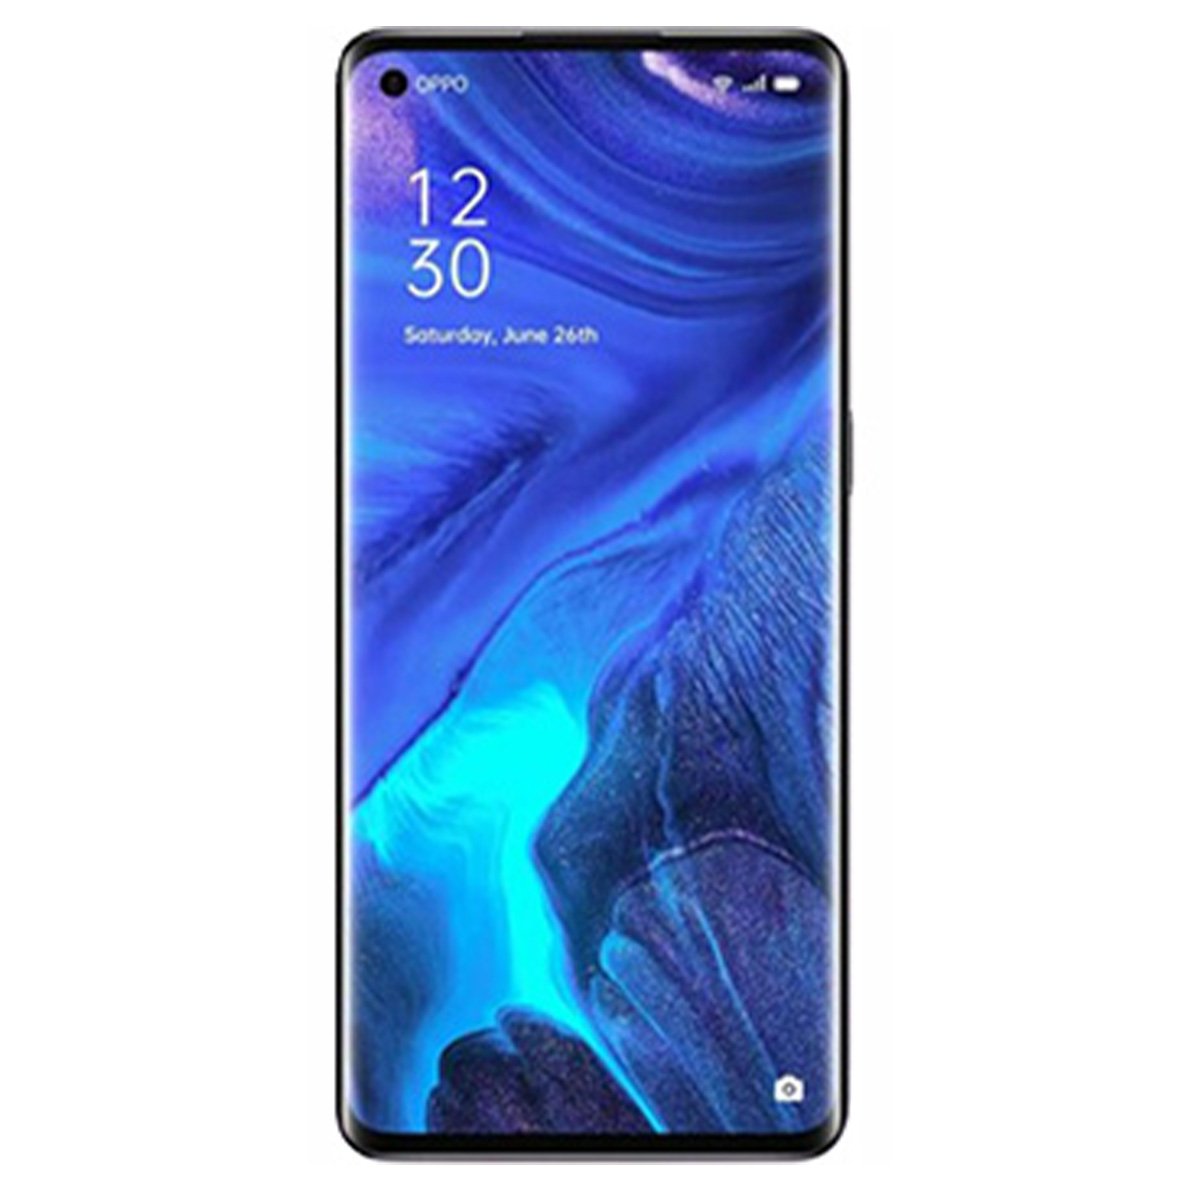 Oppo F21 Pro Price in Pakistan & Specifications - Phoneworld